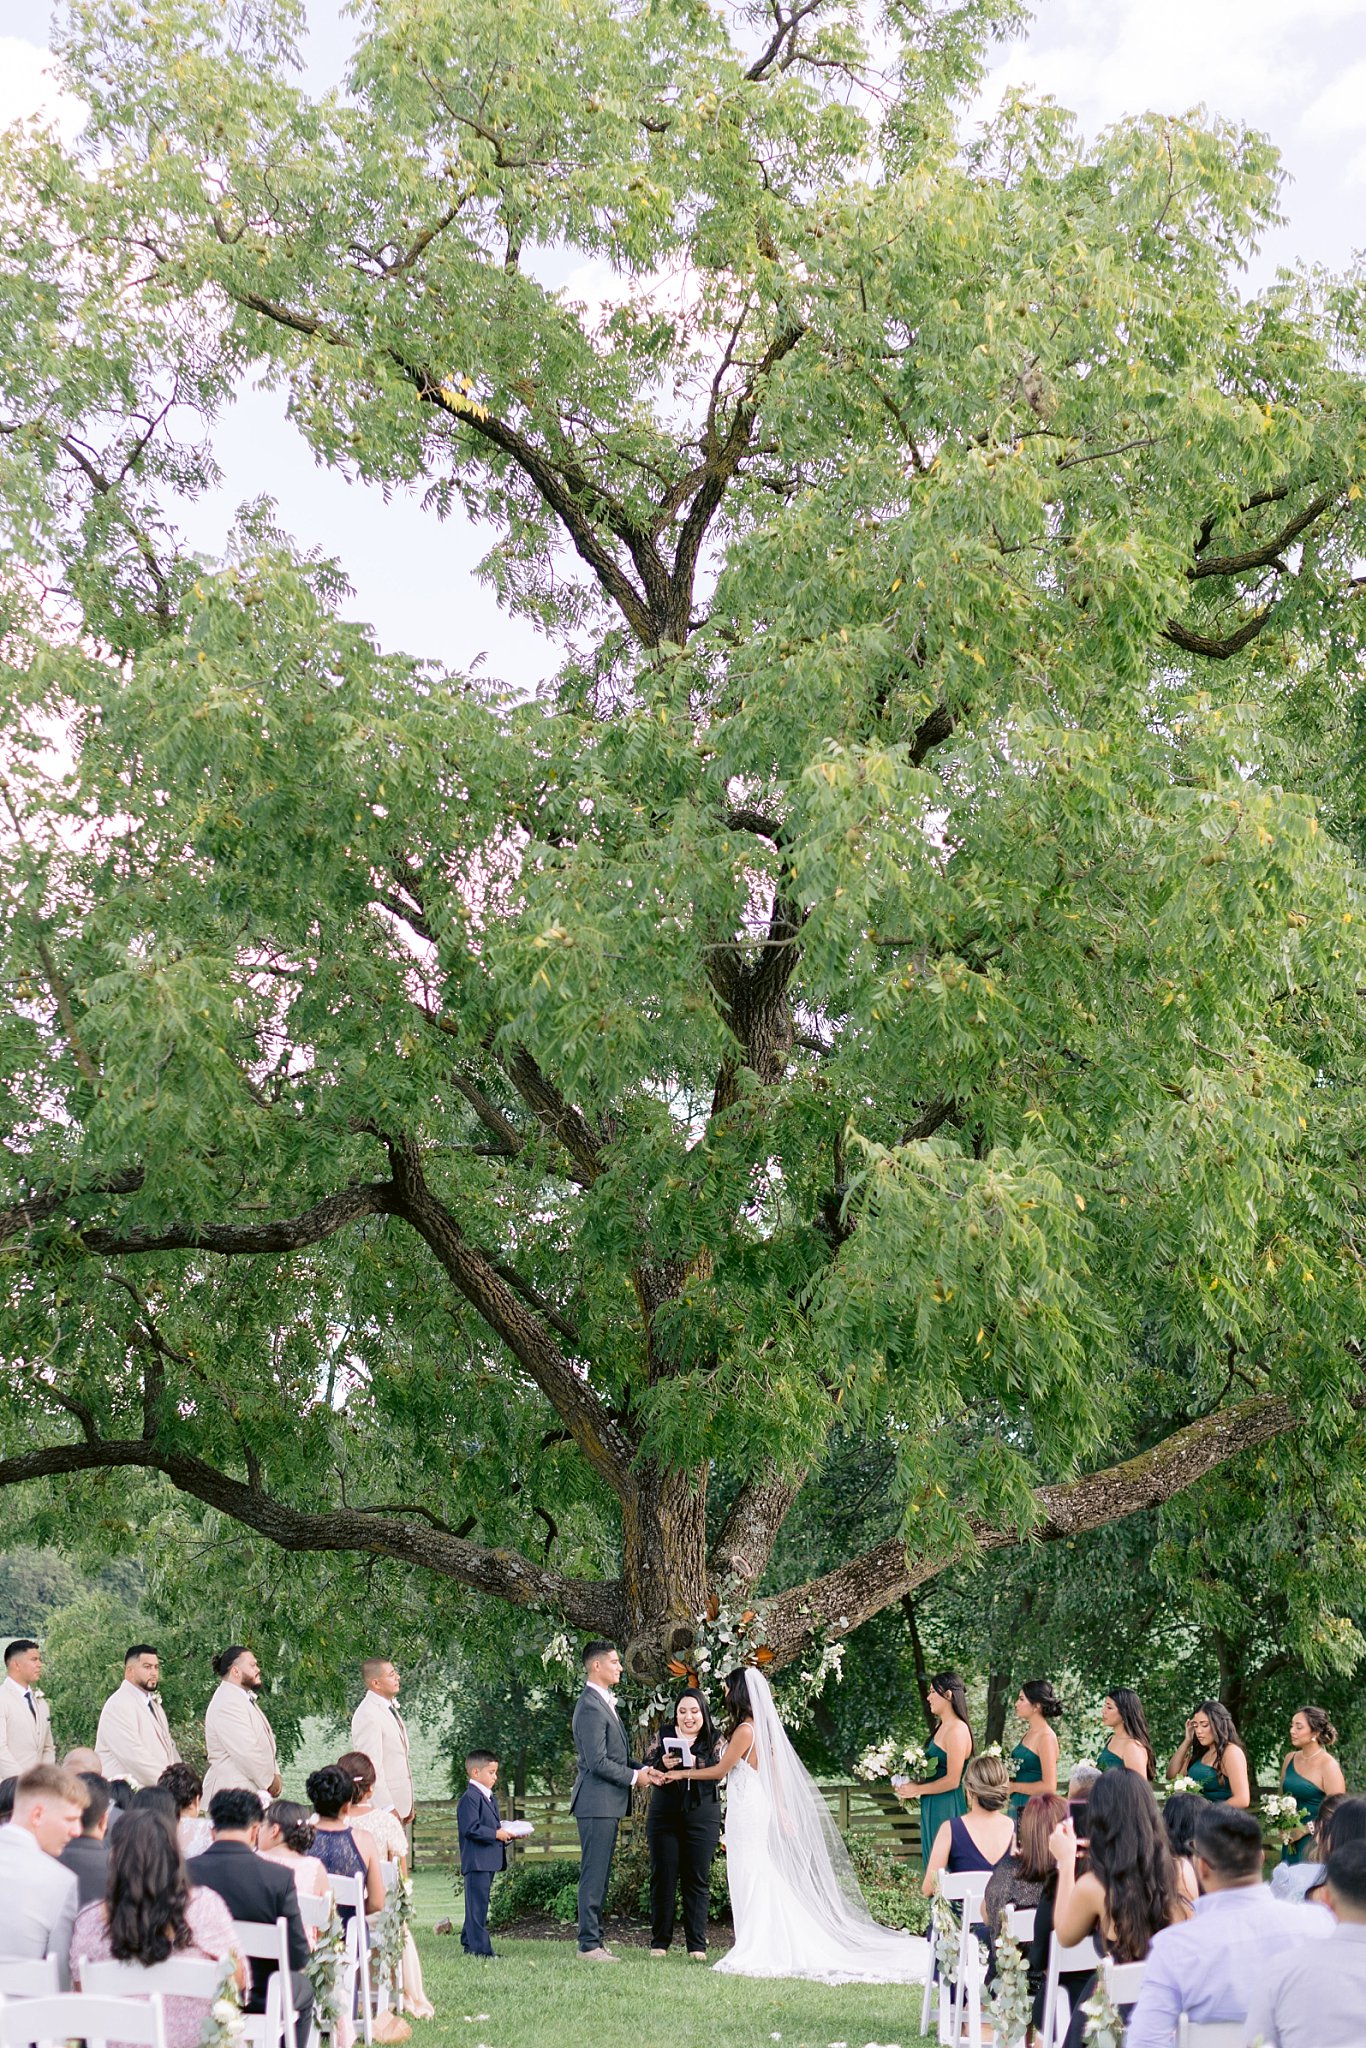 wide image of wedding ceremony taking place beneath the large trees at walker's overlook wedding venue in maryland